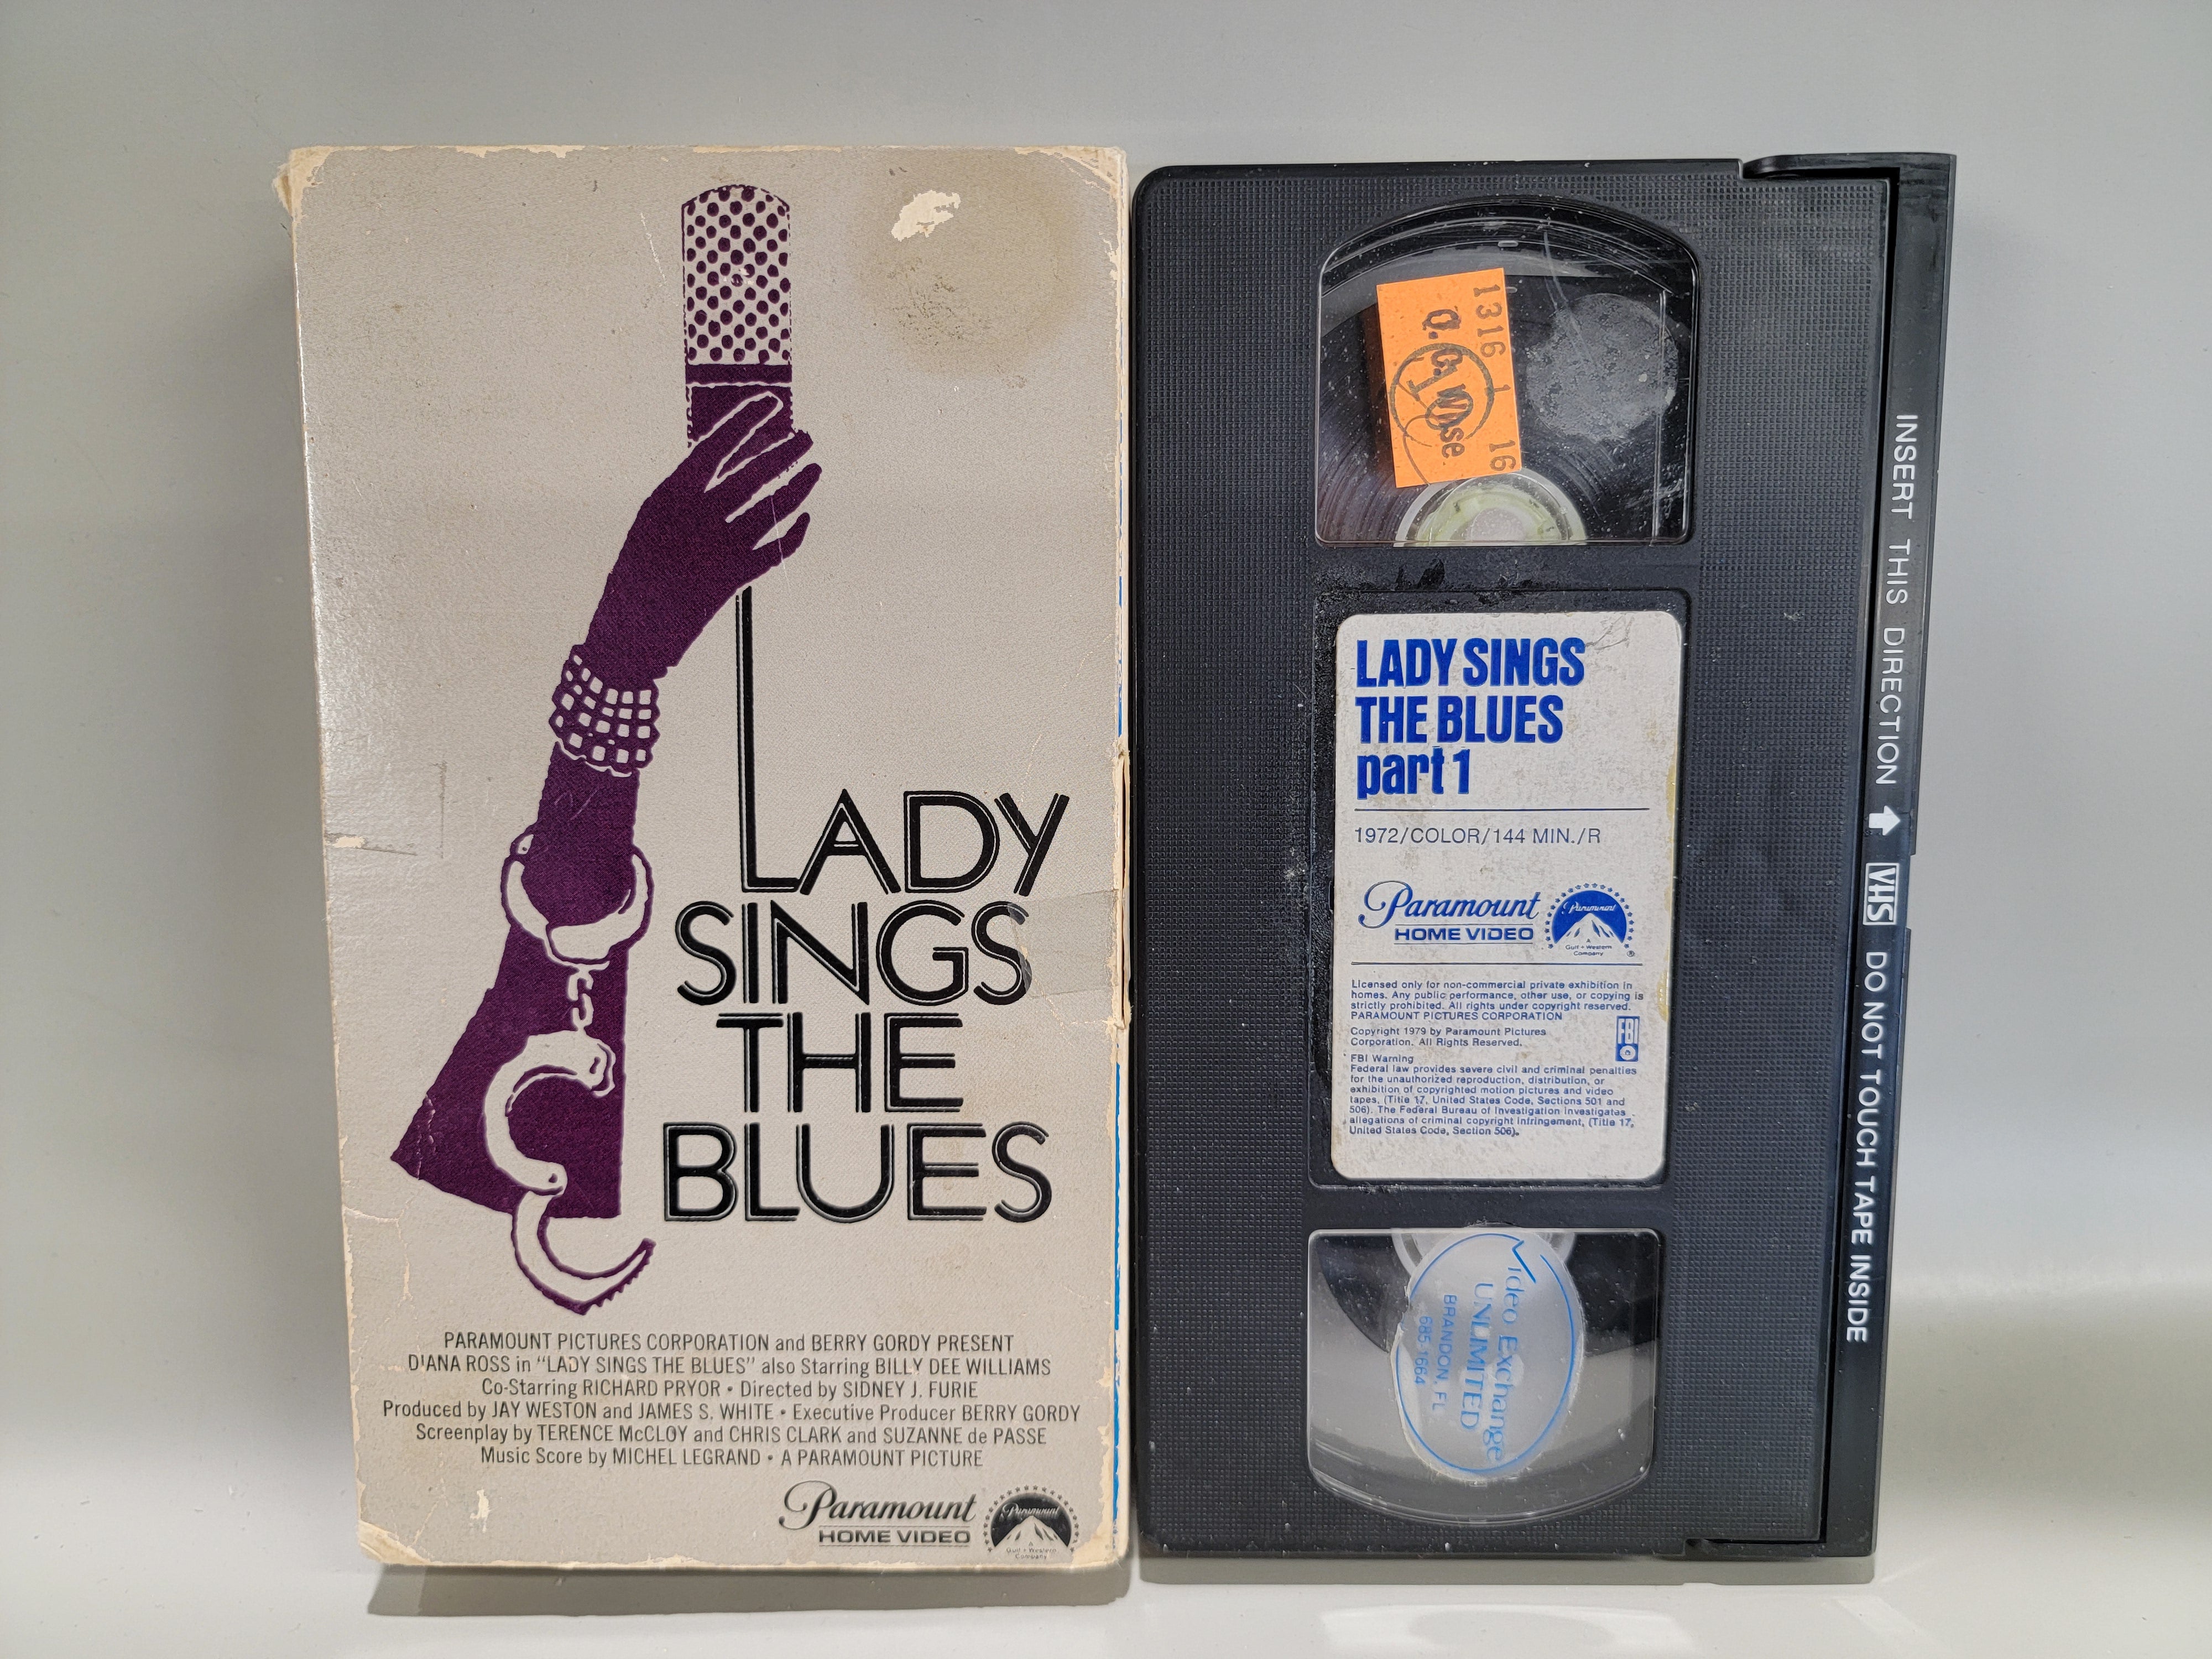 LADY SINGS THE BLUES (2 TAPES) VHS [USED]